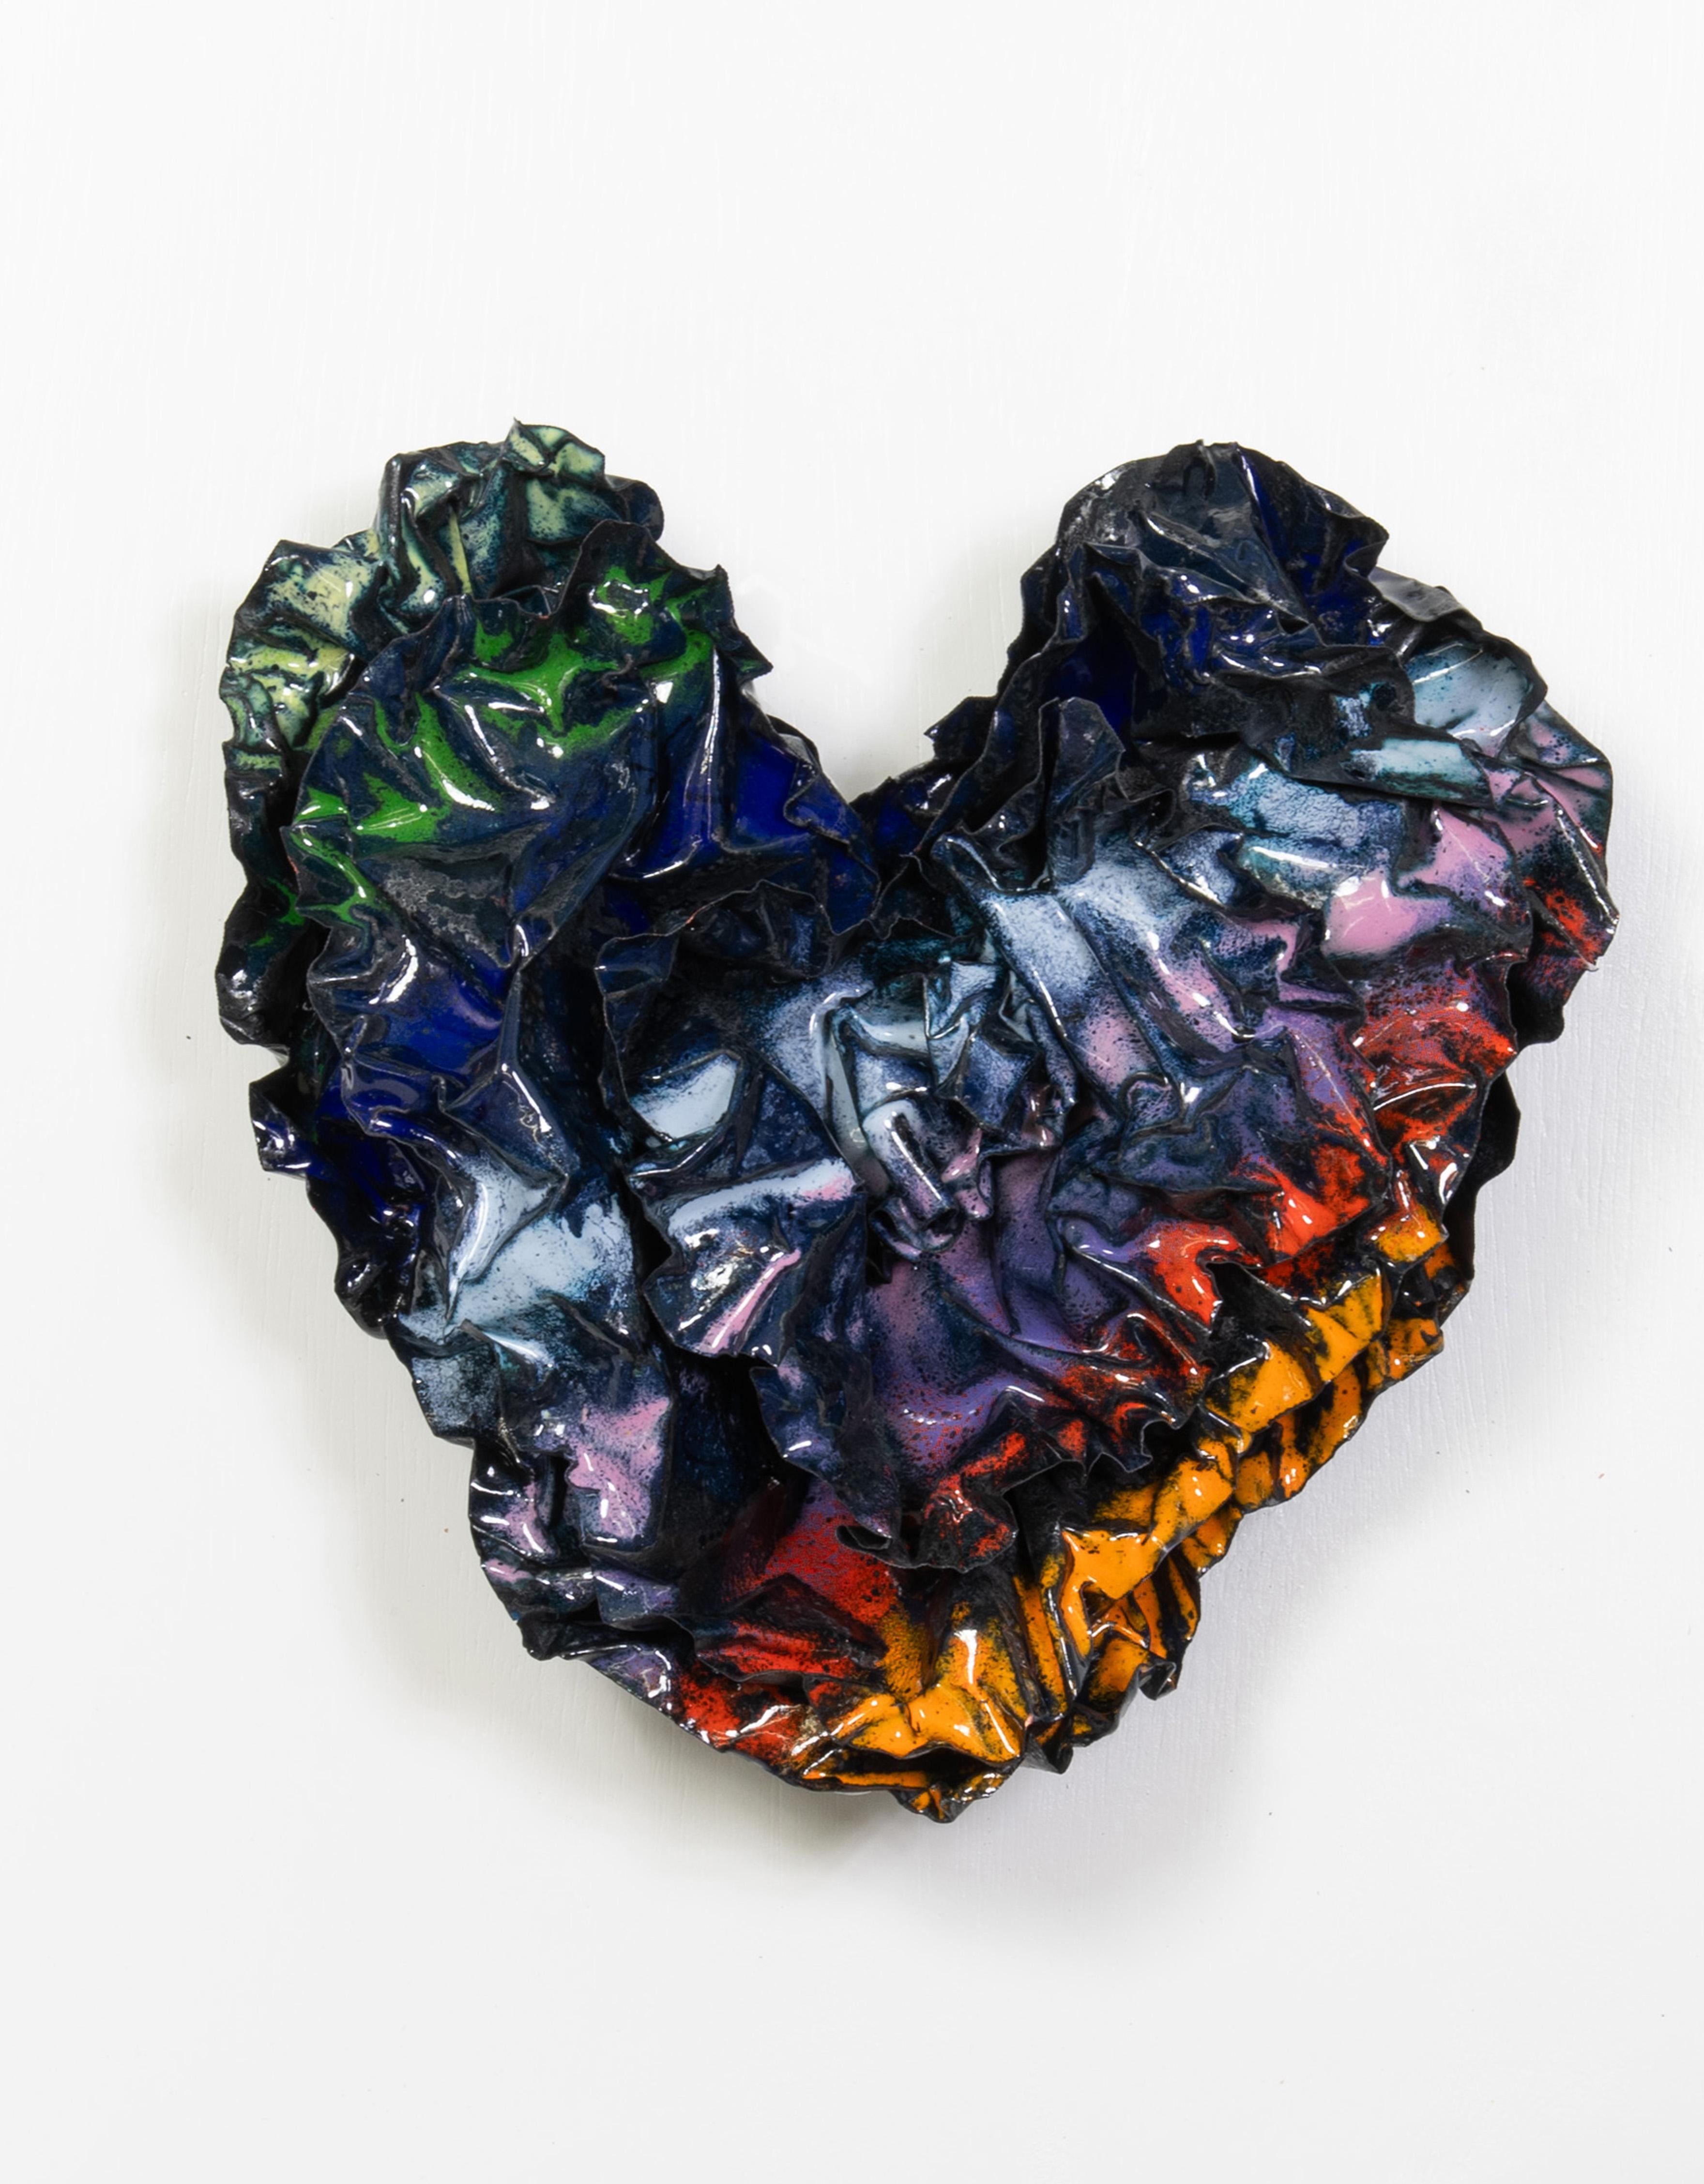 This heart was created with a rainbow of colors on a black background and with many layers of  copper to give the sculpture depth and intrigue.  This sculpture honors our LGBTQIA2S Community by representing the rainbow of colors.  This Heart was